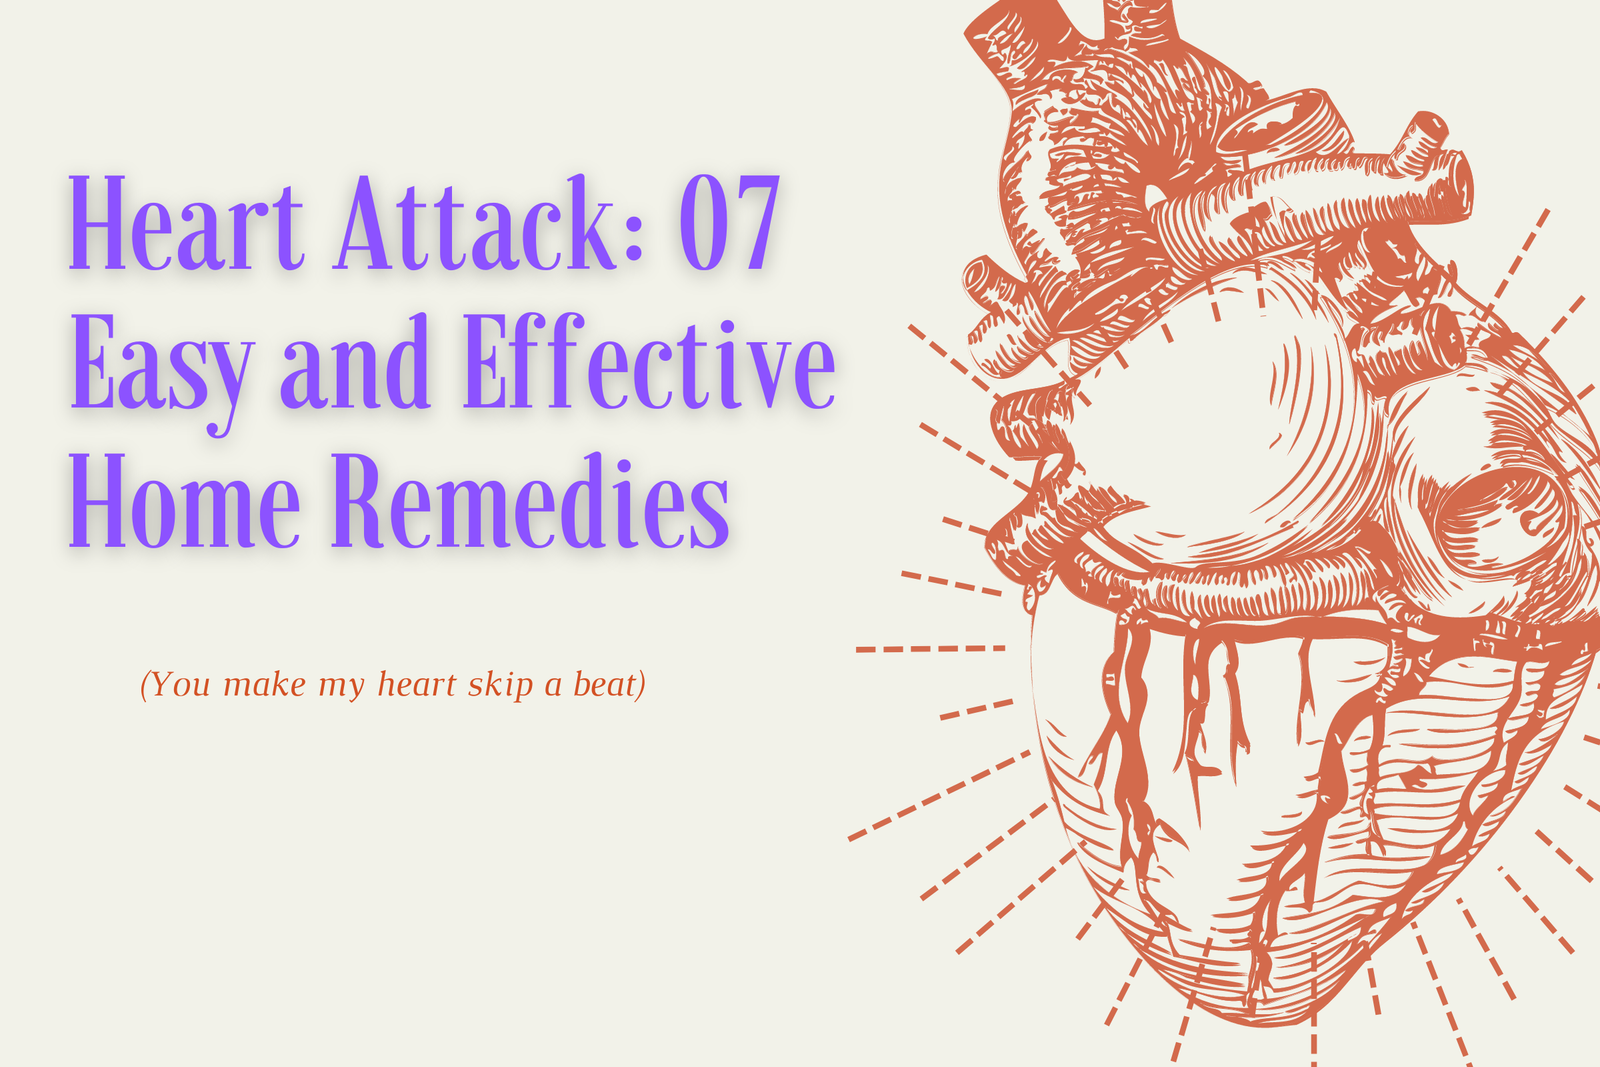 Heart Attack 07 Home Remedies